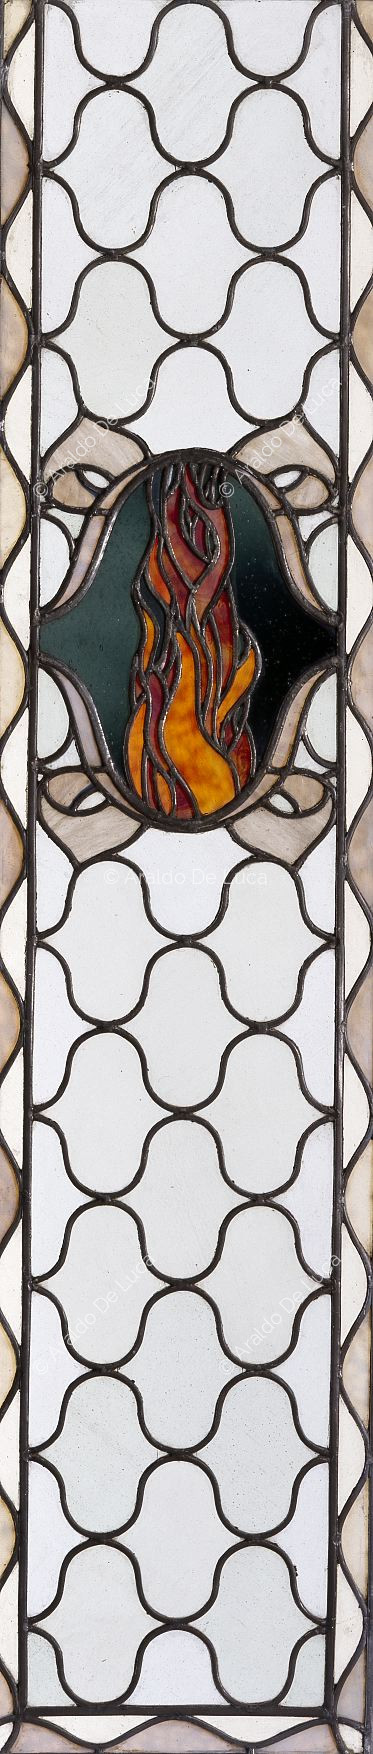 Stained-glass window with geometric motif